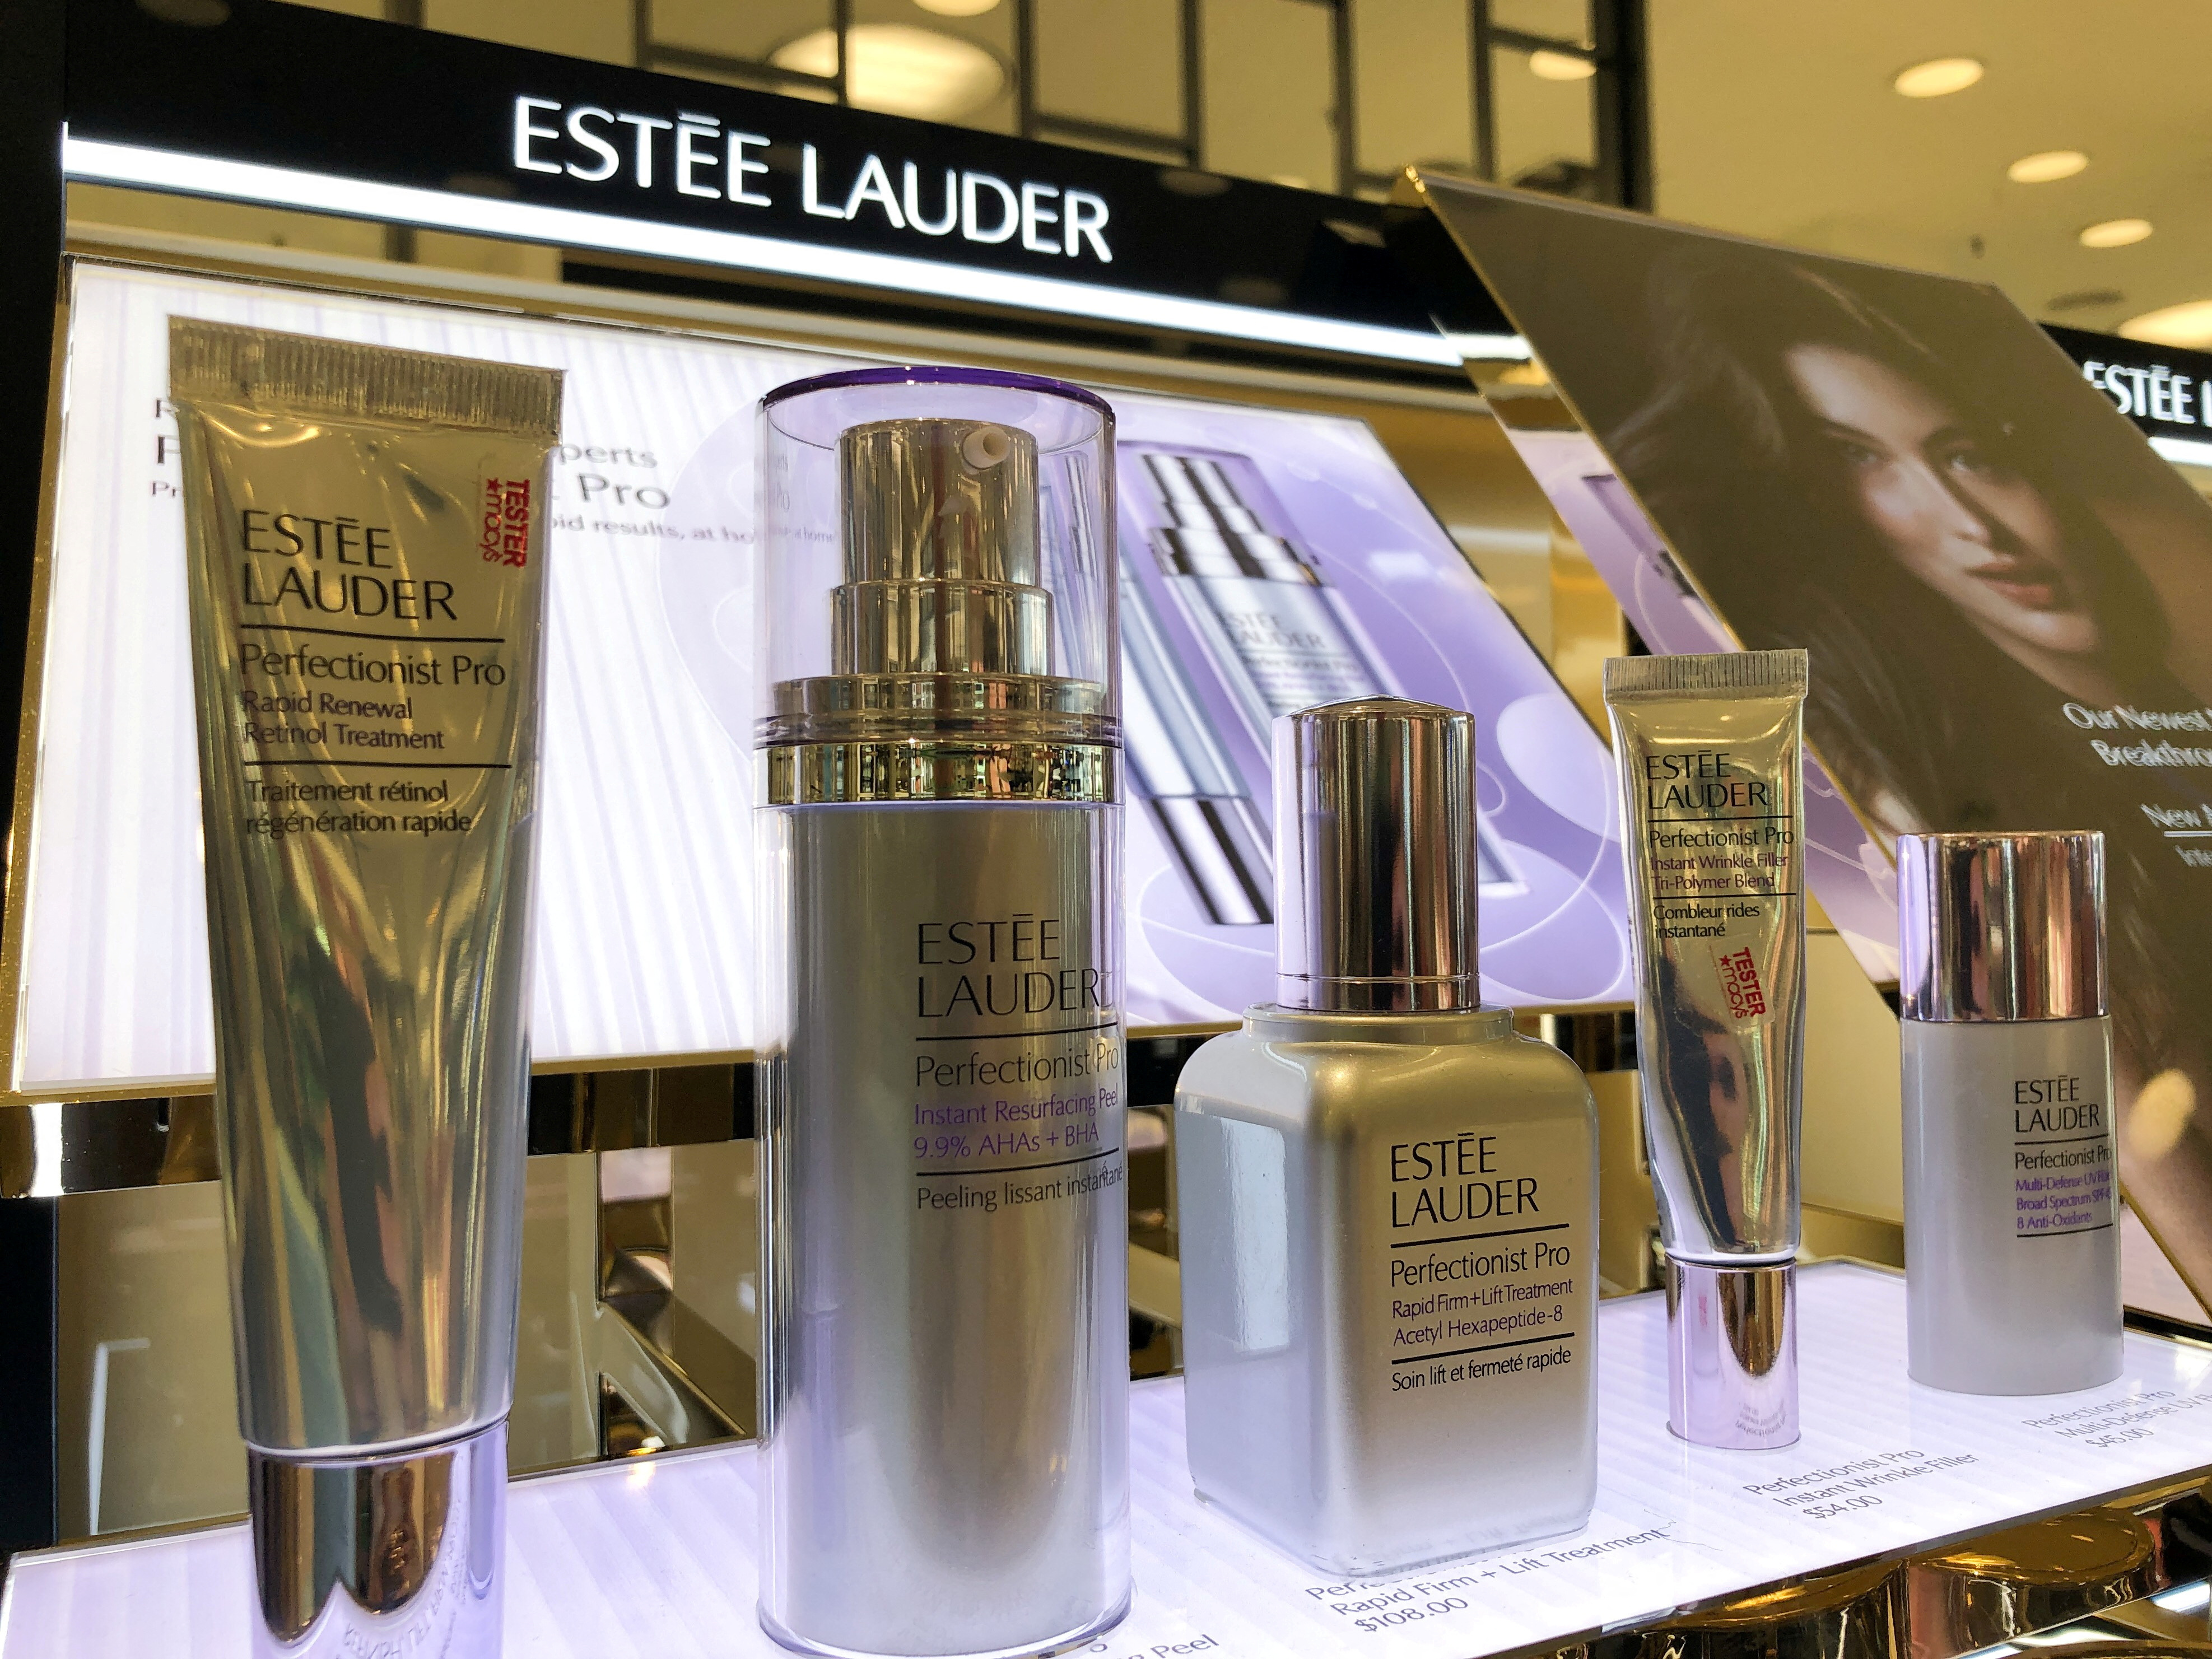 Estee Lauder nears $ billion deal to buy Tom Ford - FT | Reuters